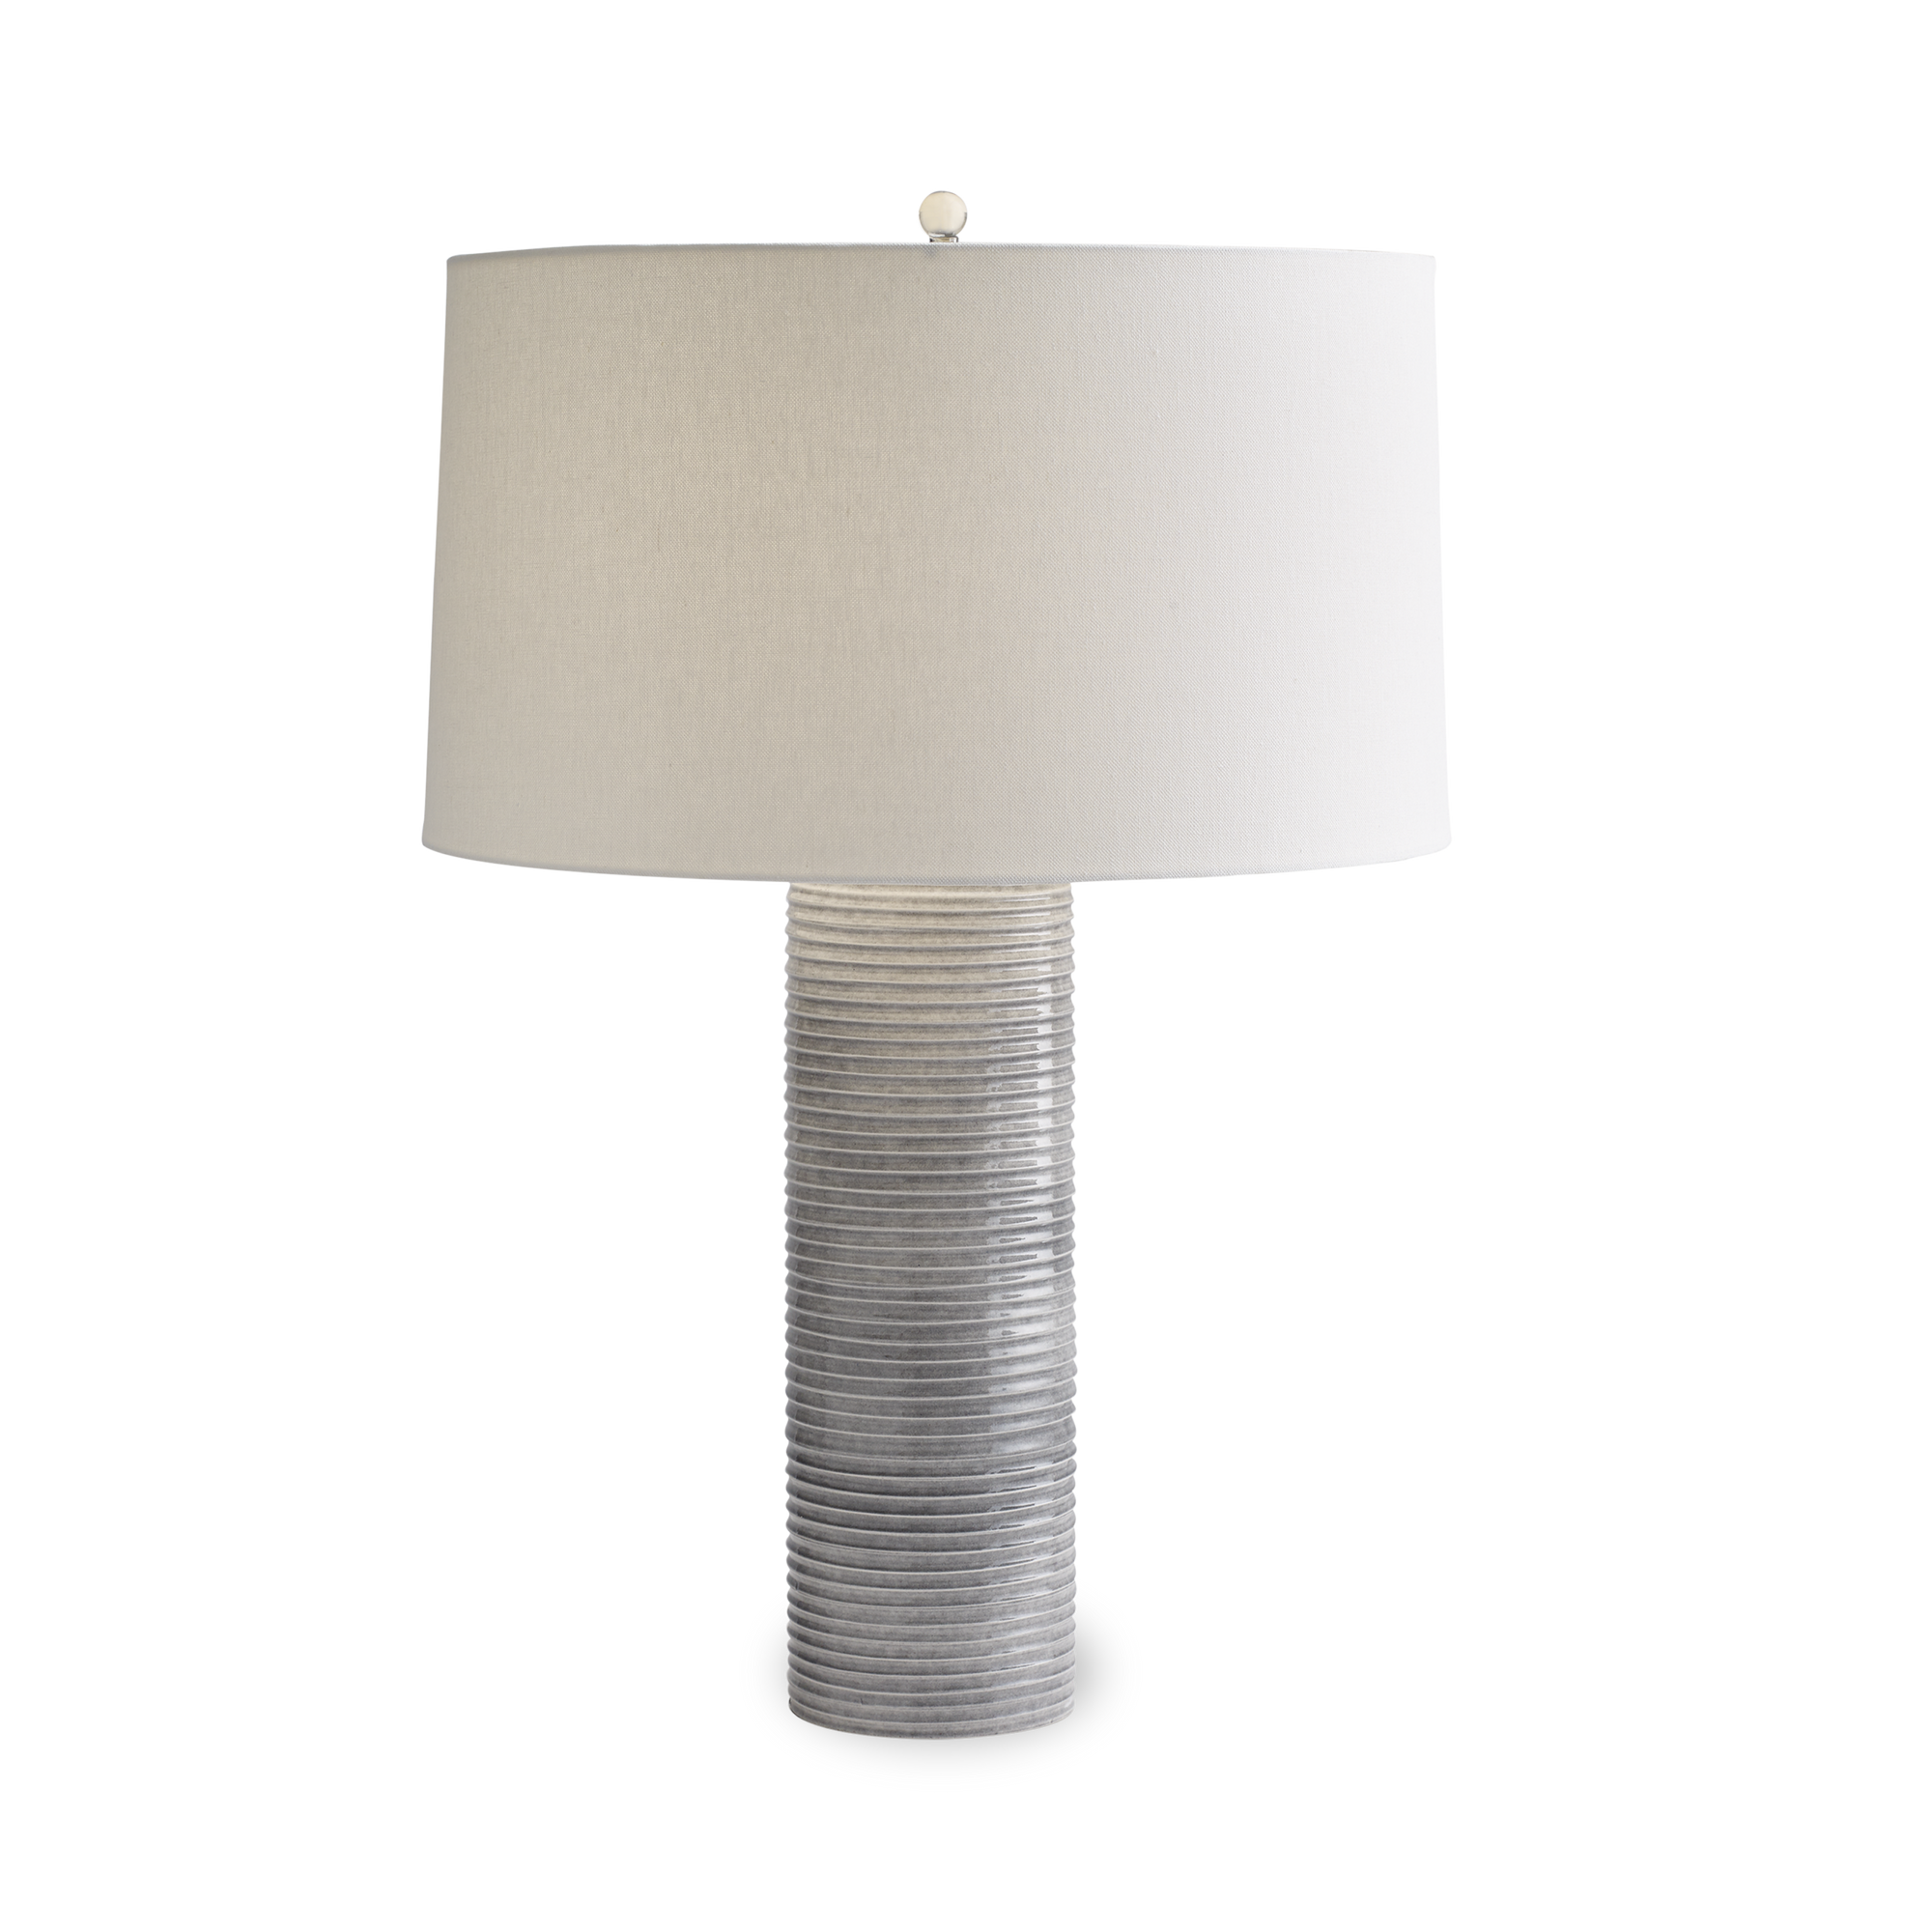 The statuesque Broderick Table Lamp has a column base with deeply ridged detail.